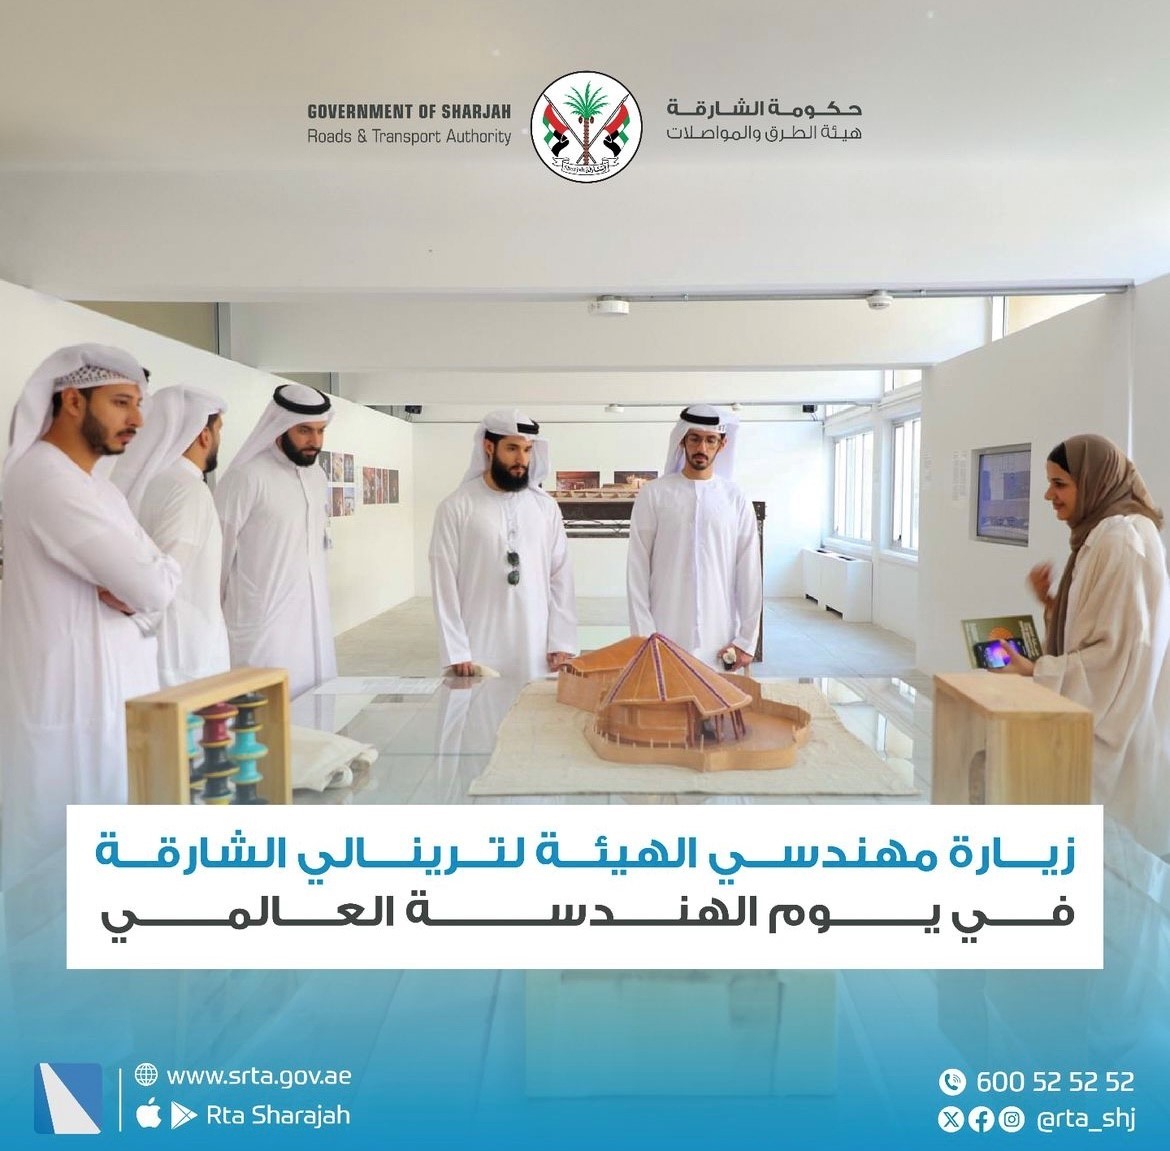 Authority engineers visit the Sharjah Triennial on World Engineering Day